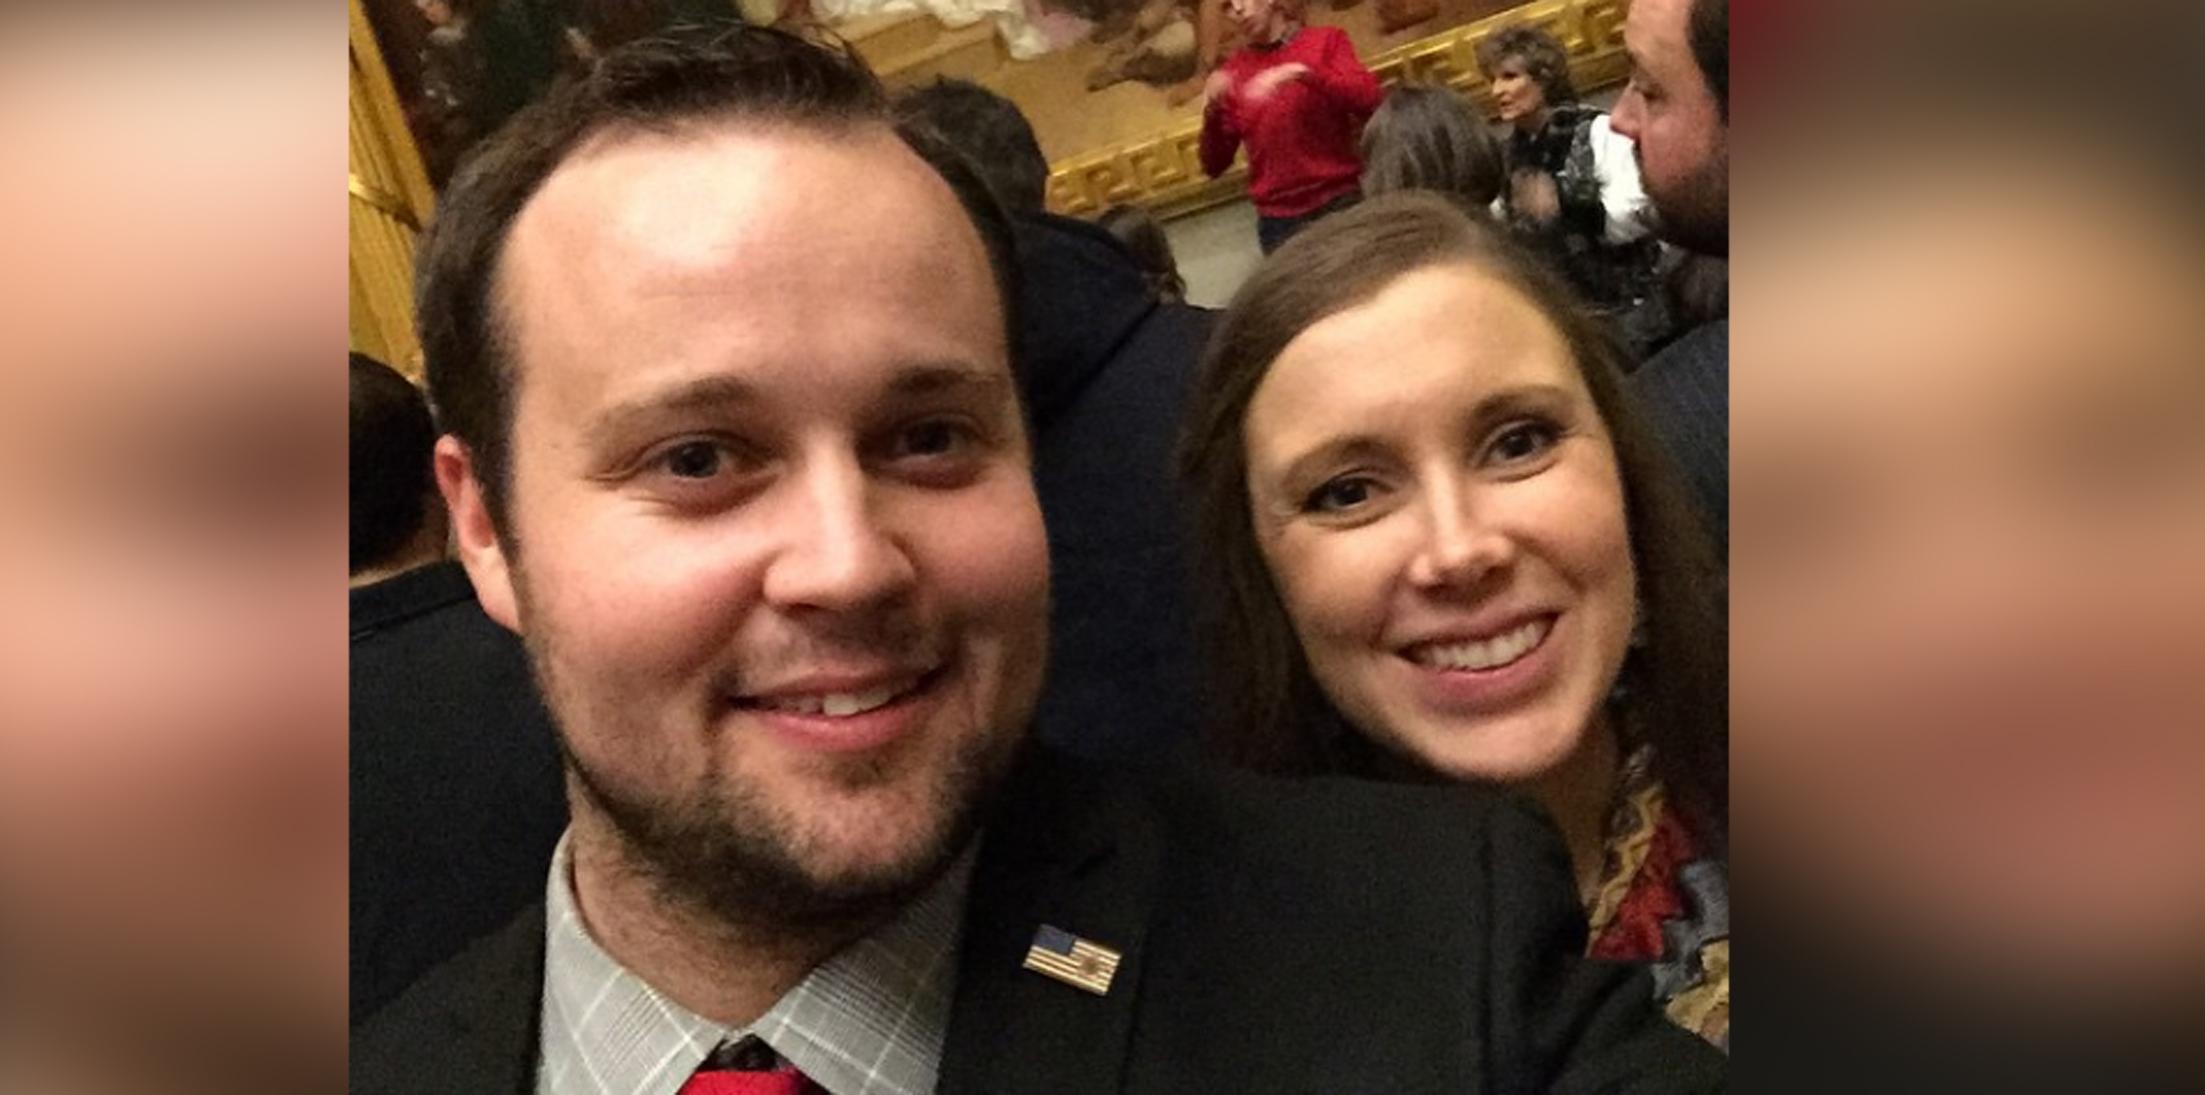 Josh Duggars Finally Heading To Court For His Cheating Scandal Lawsuit 0485